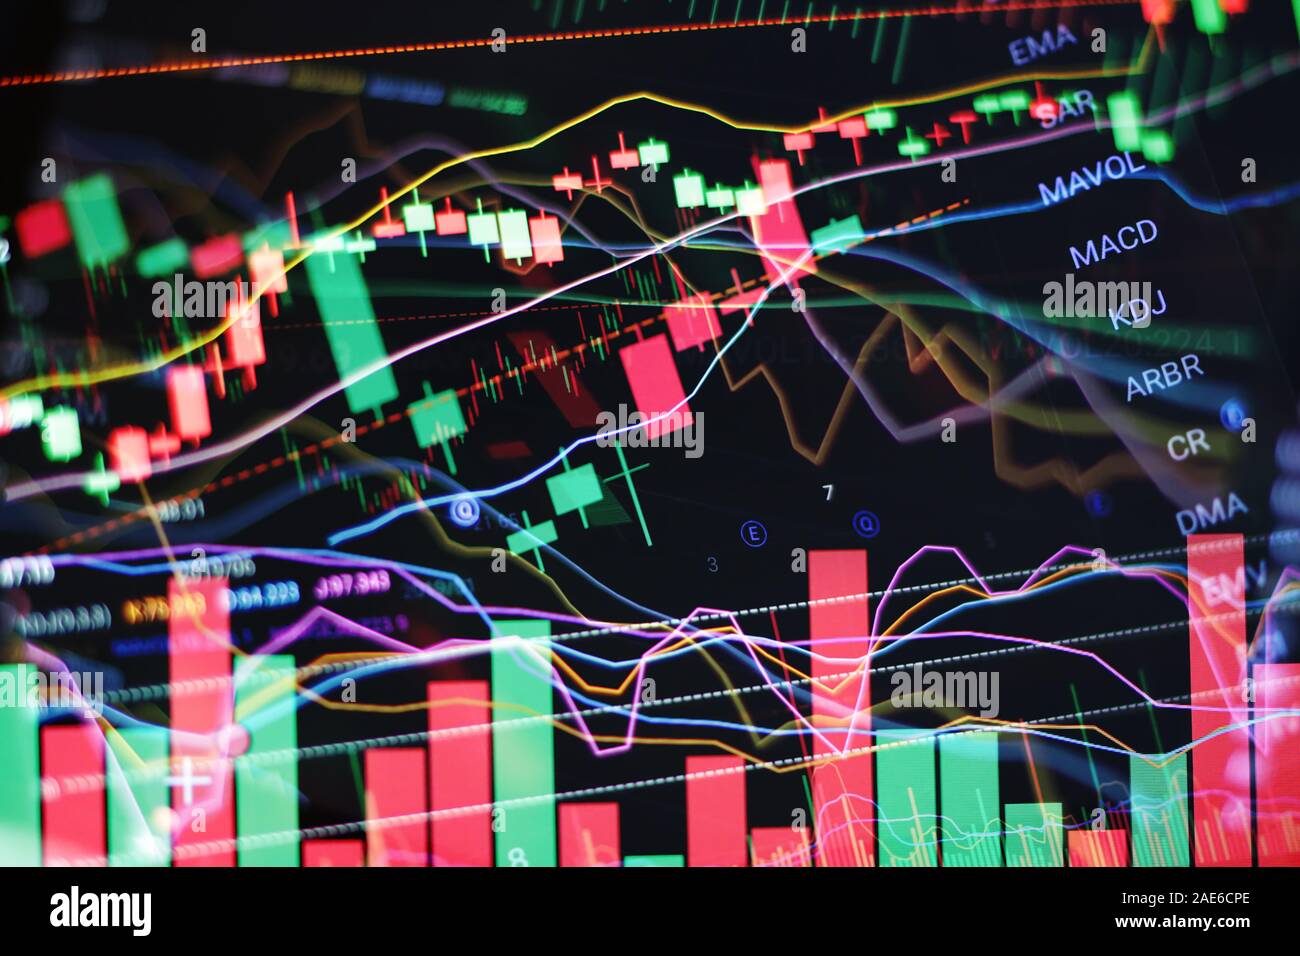 Complex Deep Stock Charts Technical Analysis Concept Stock Photo